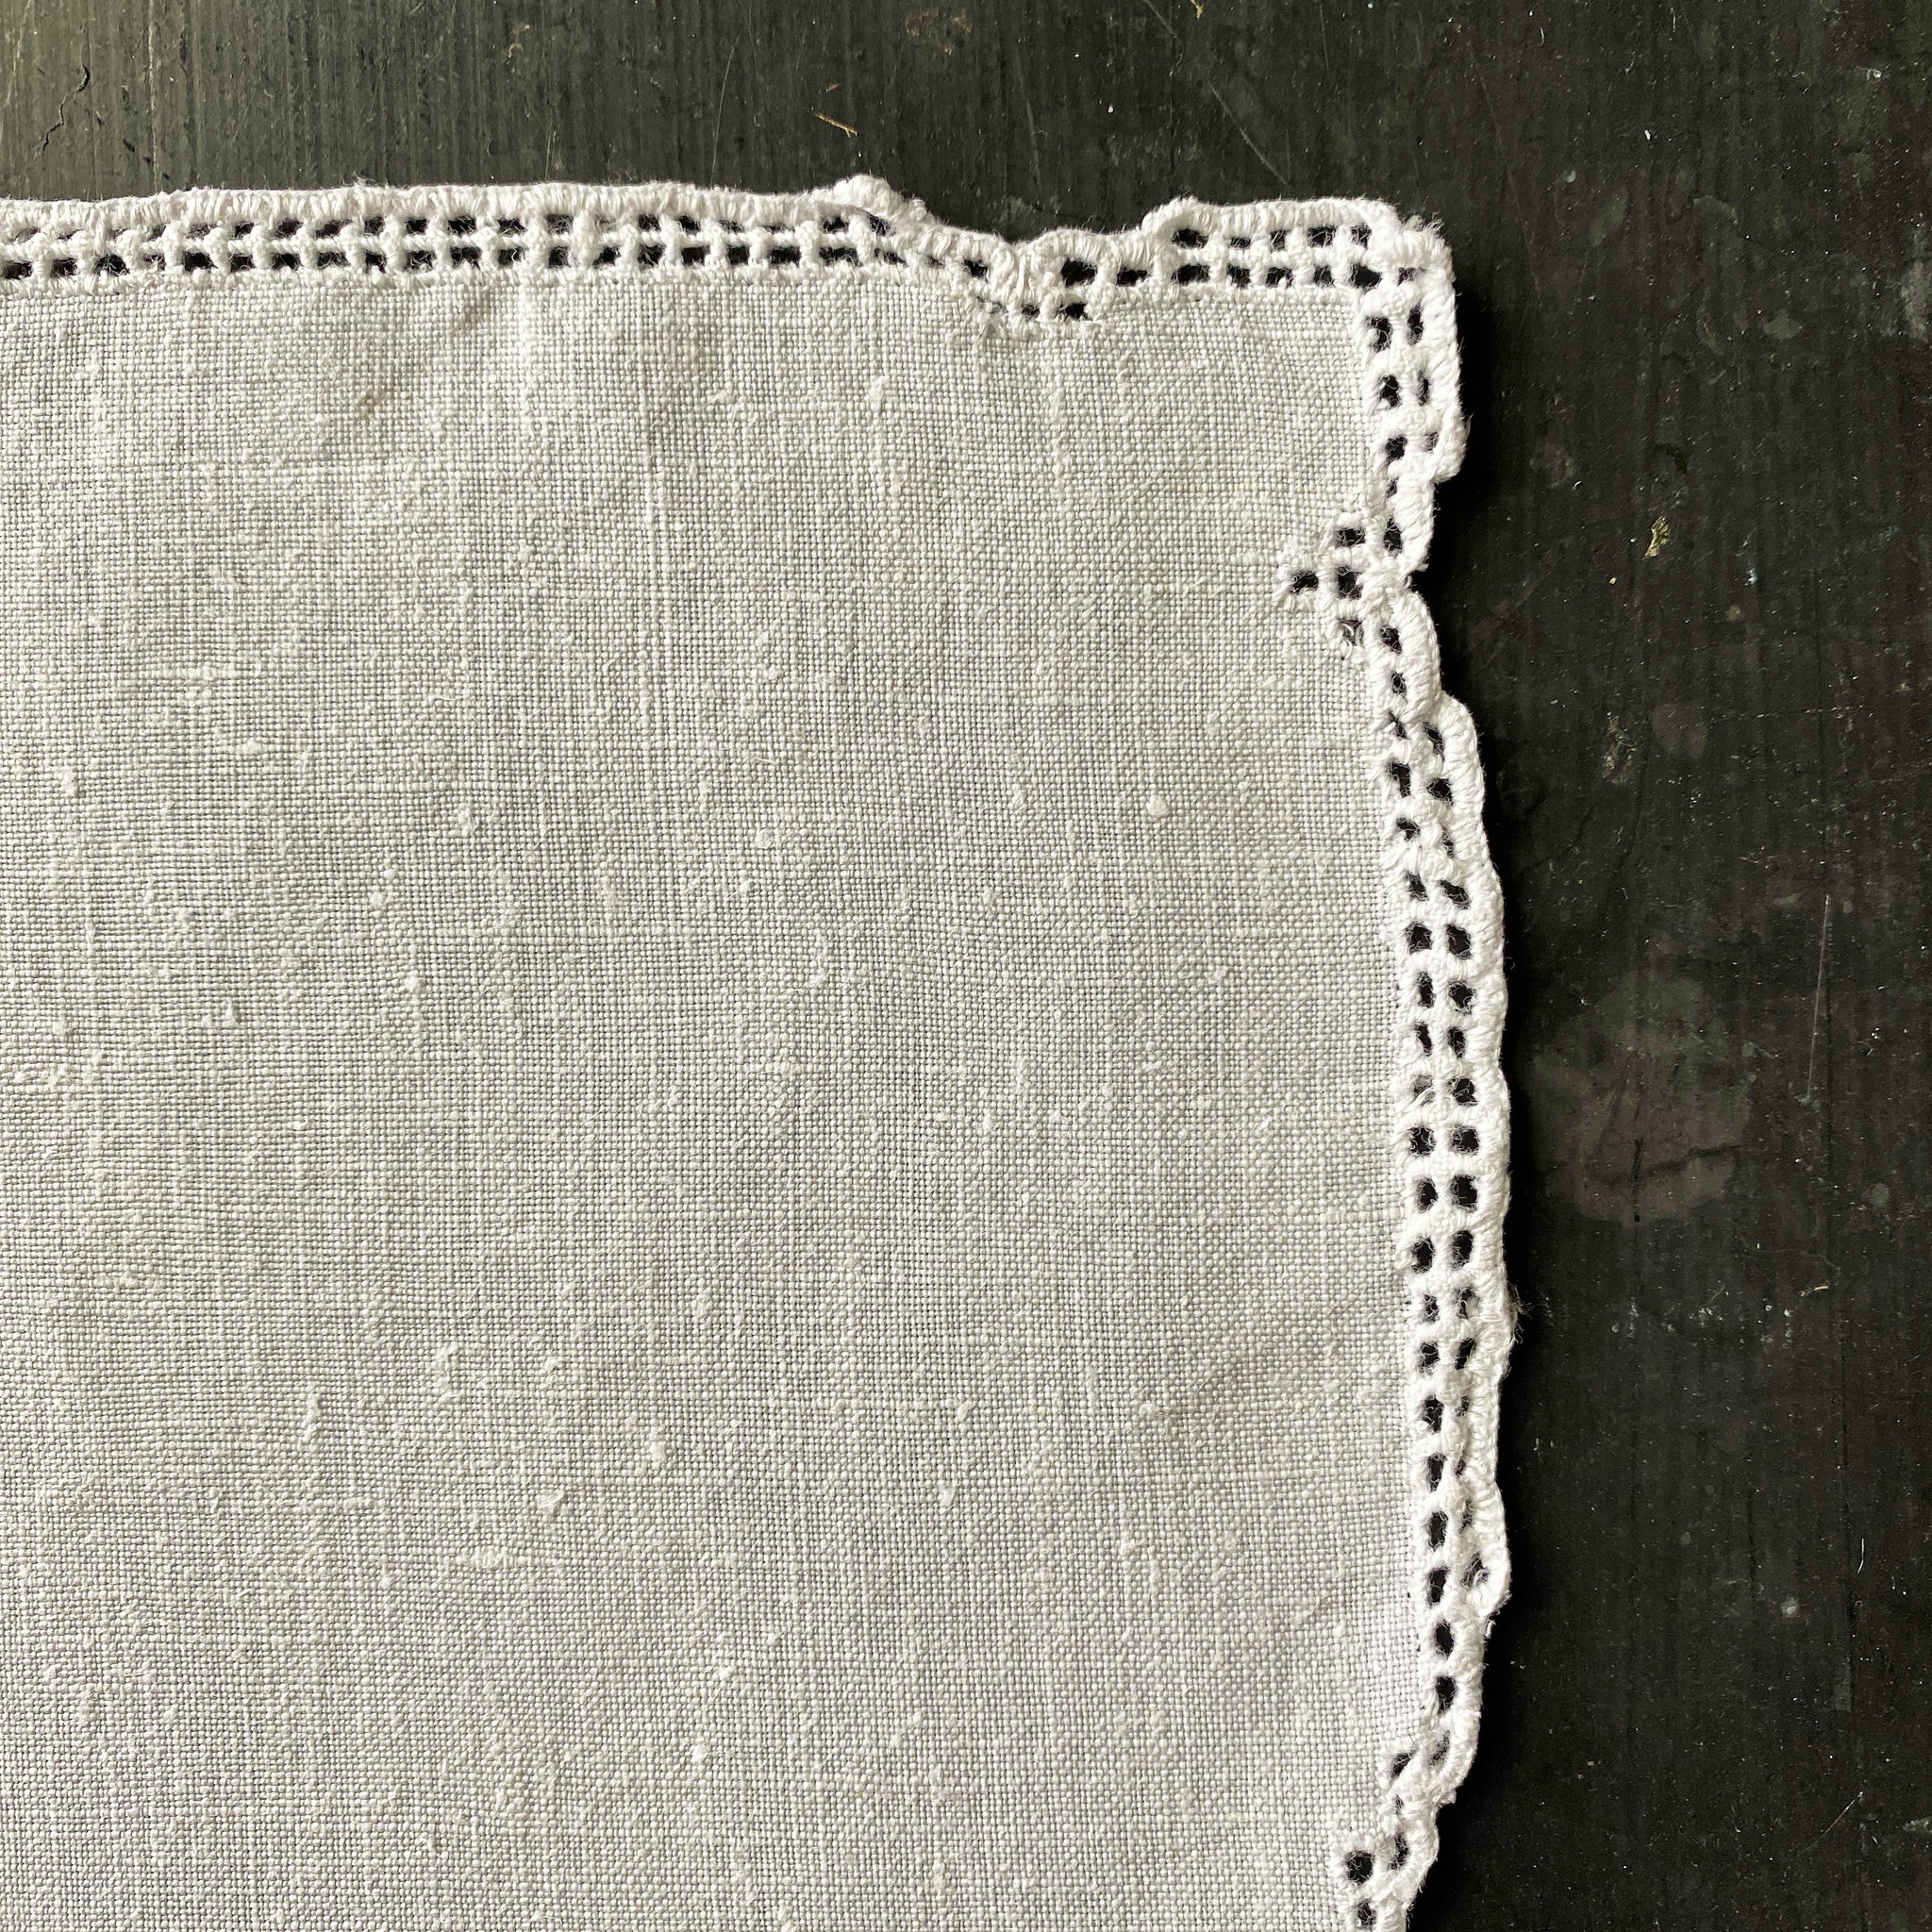 Vintage White Linen Dinner Napkins with Hemstitched Drawn Work and Corner Design - Set of Two